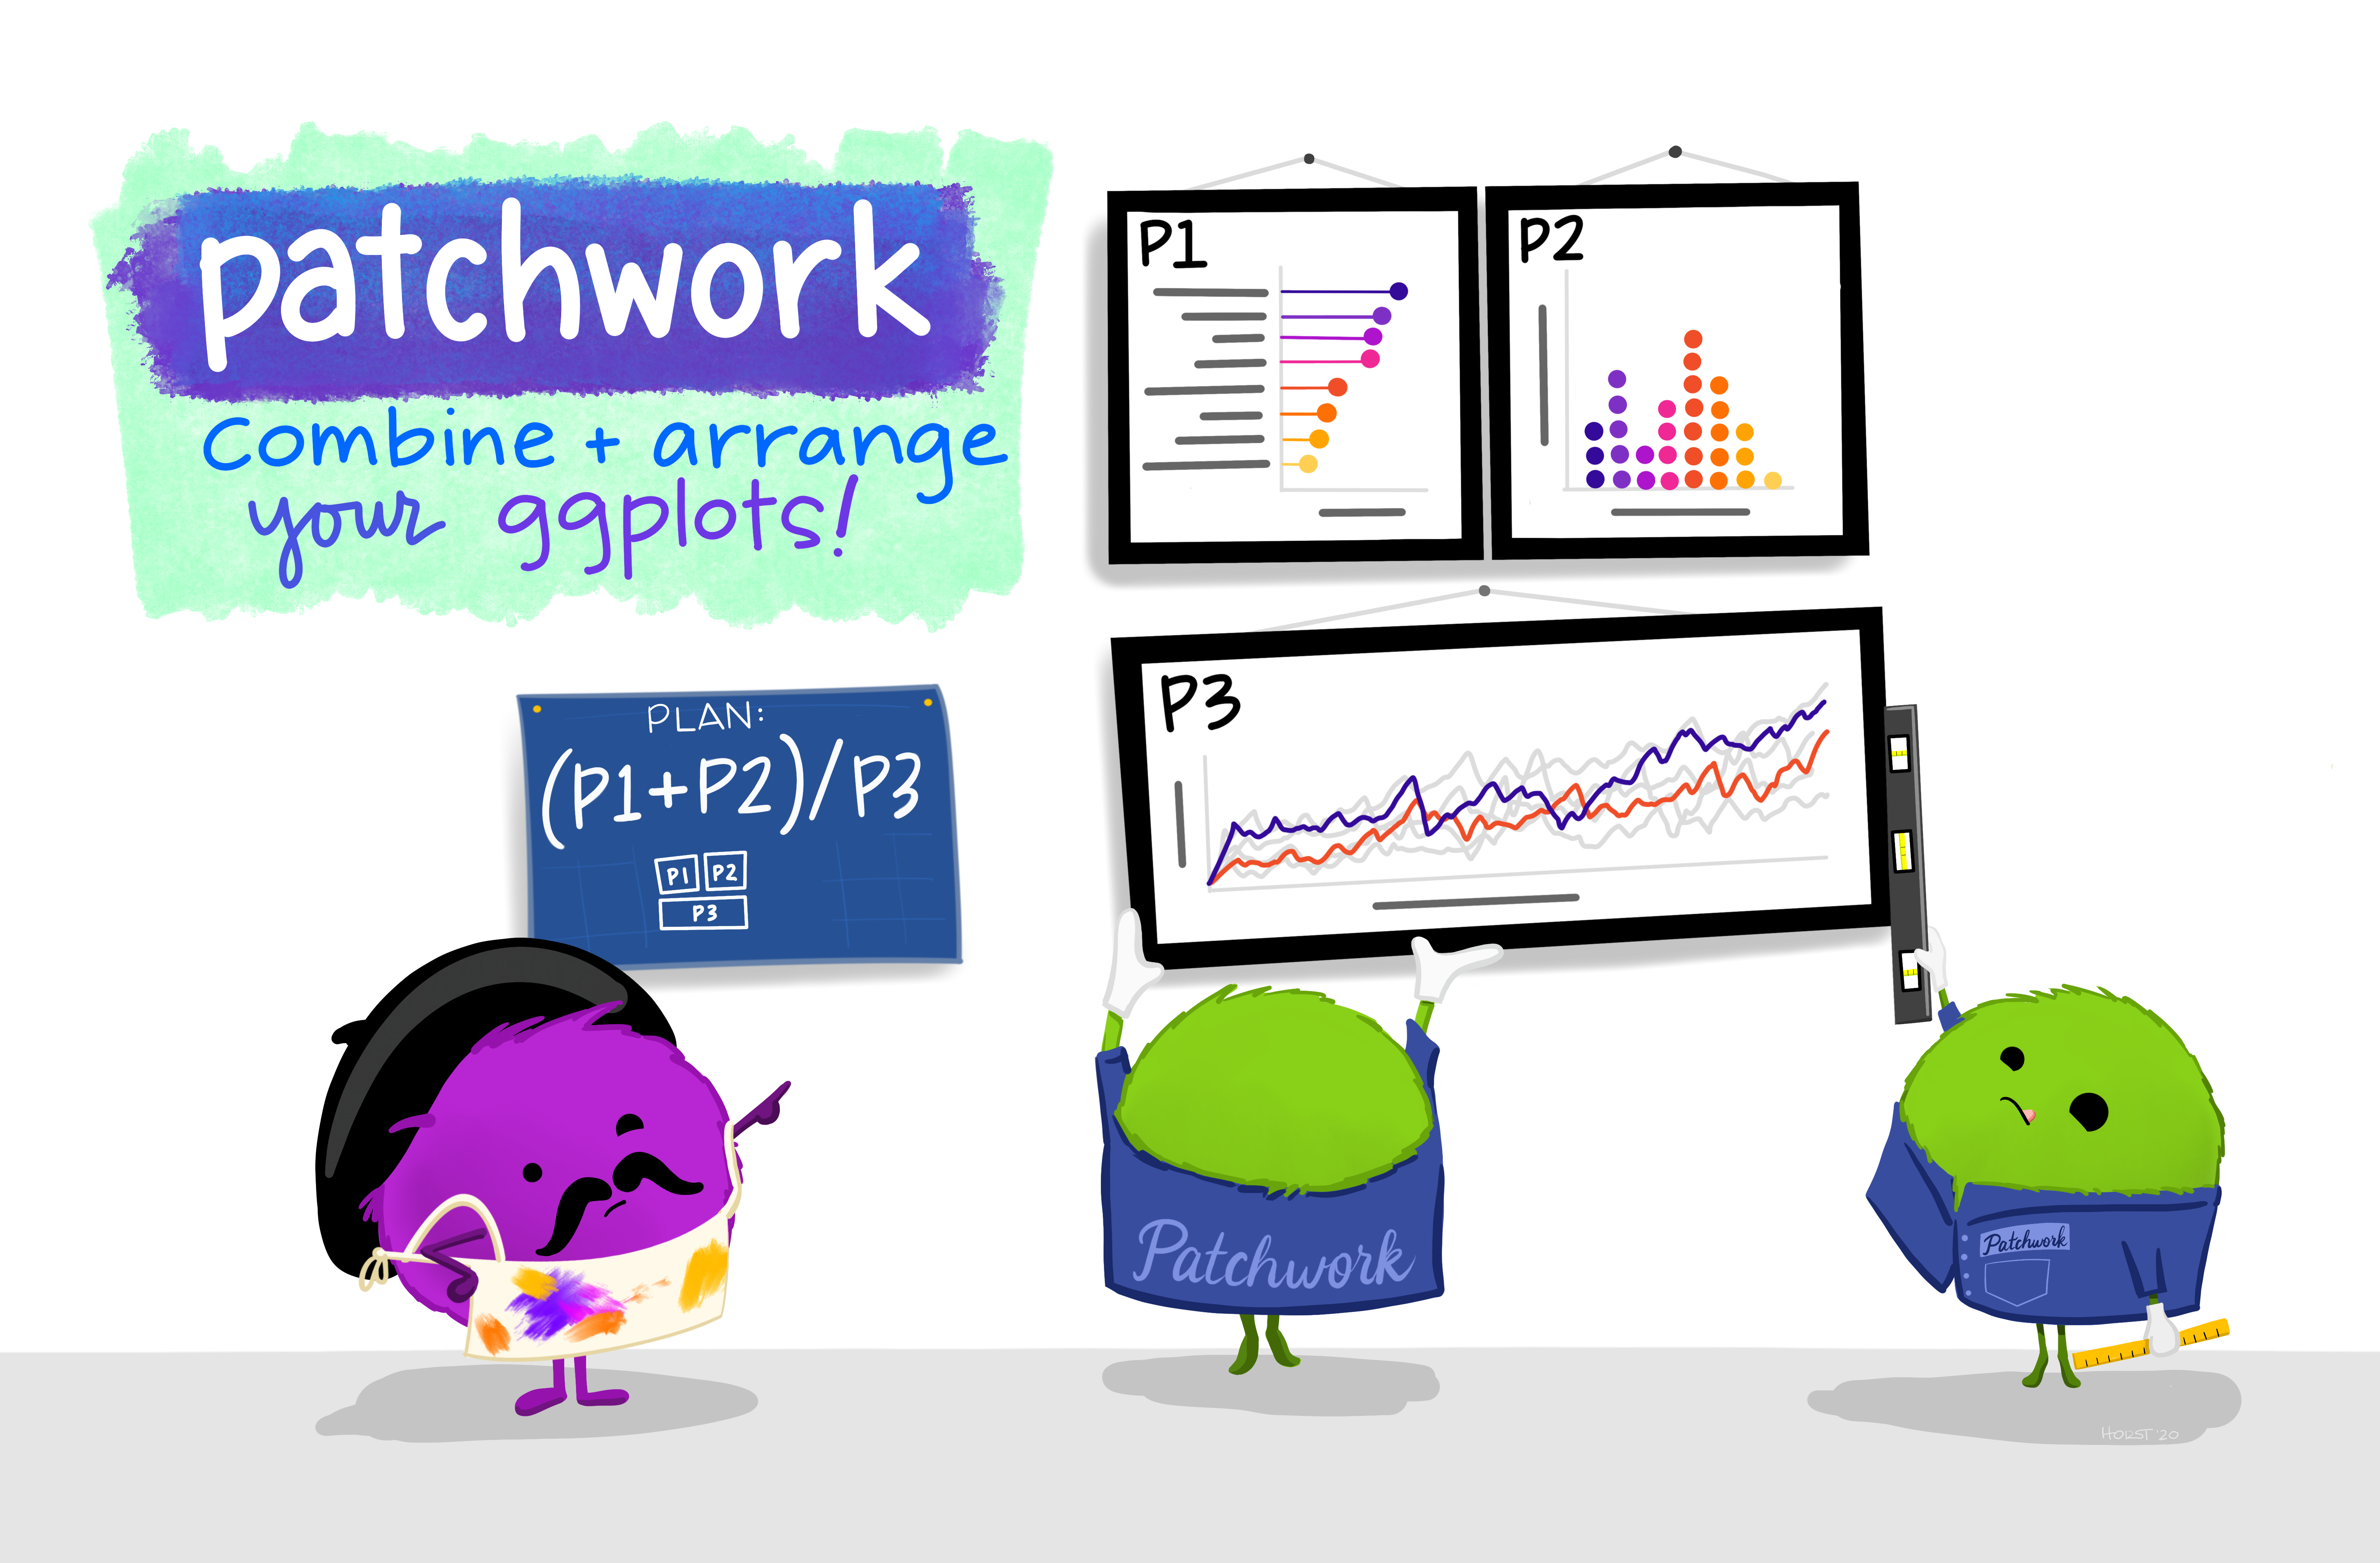 Fuzzy cartoon monsters in white gloves and uniforms hanging multiple plots together on a wall, with an artist monster wearing a beret and smock directing them to the correct orientation. There is a blueprint plan on the wall showing how the plots should be arranged. Stylized title font reads “patchwork - combine & arrange your ggplots!”